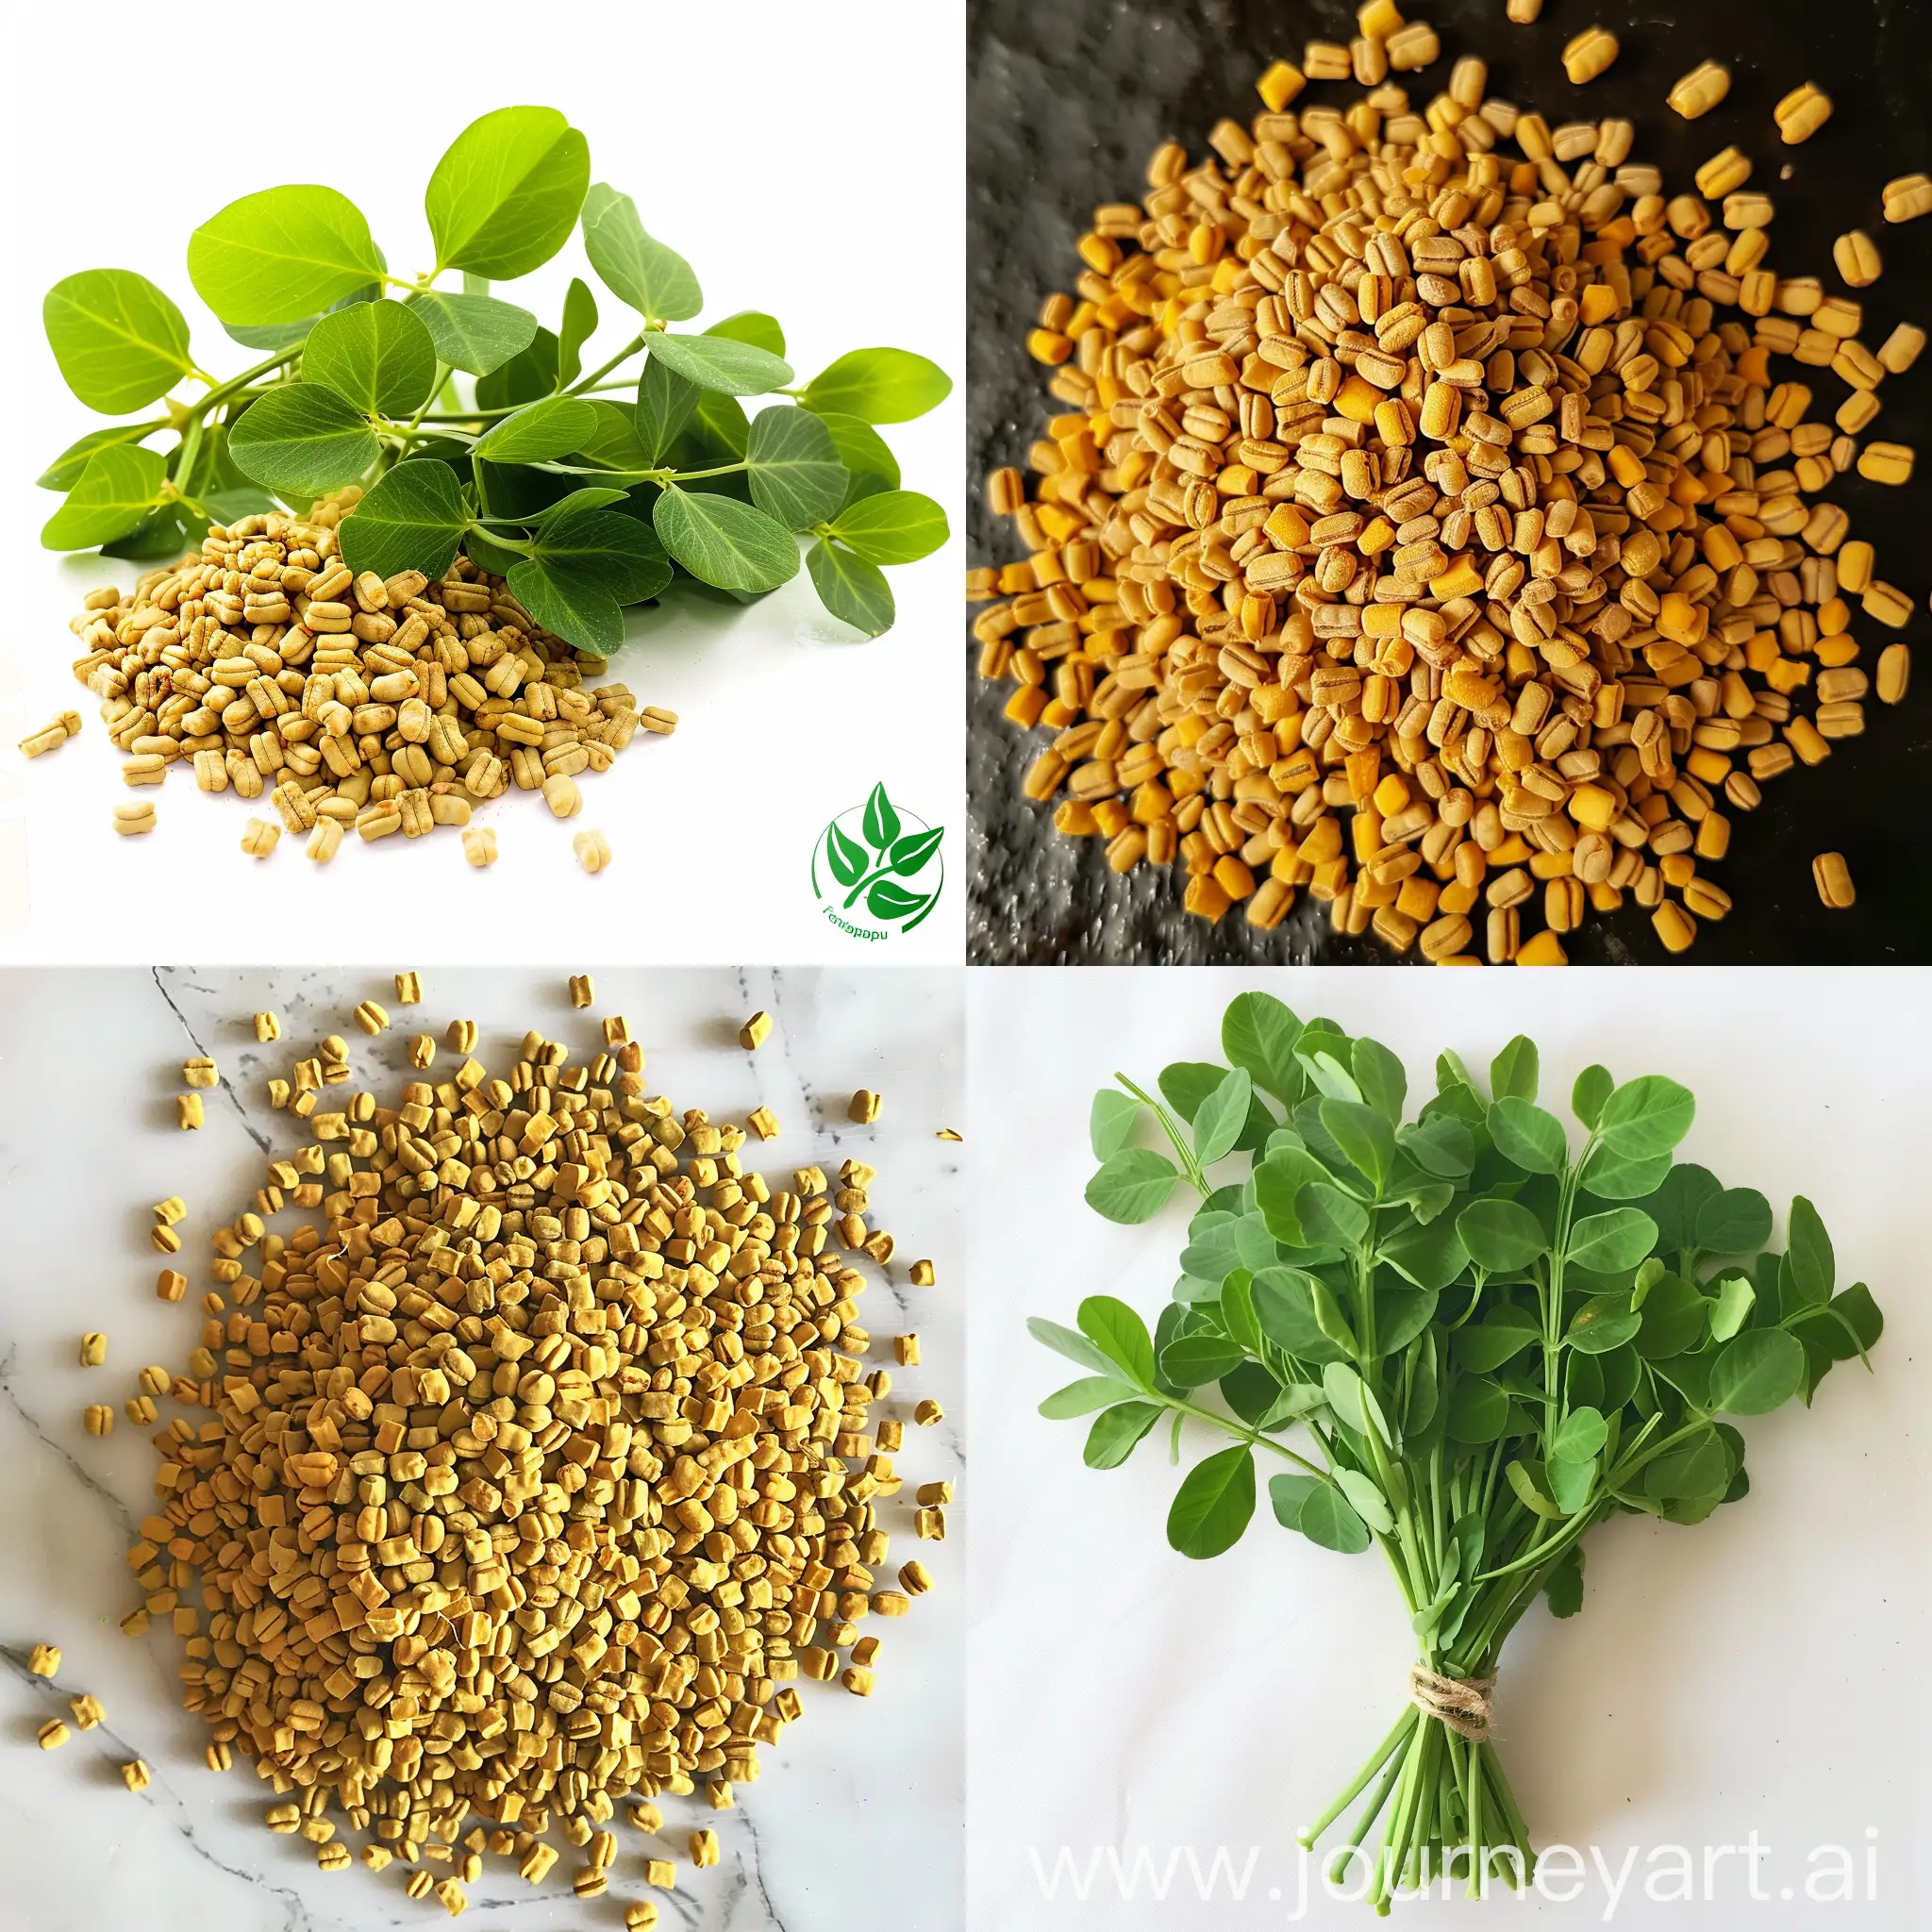 A very real photo of fenugreek